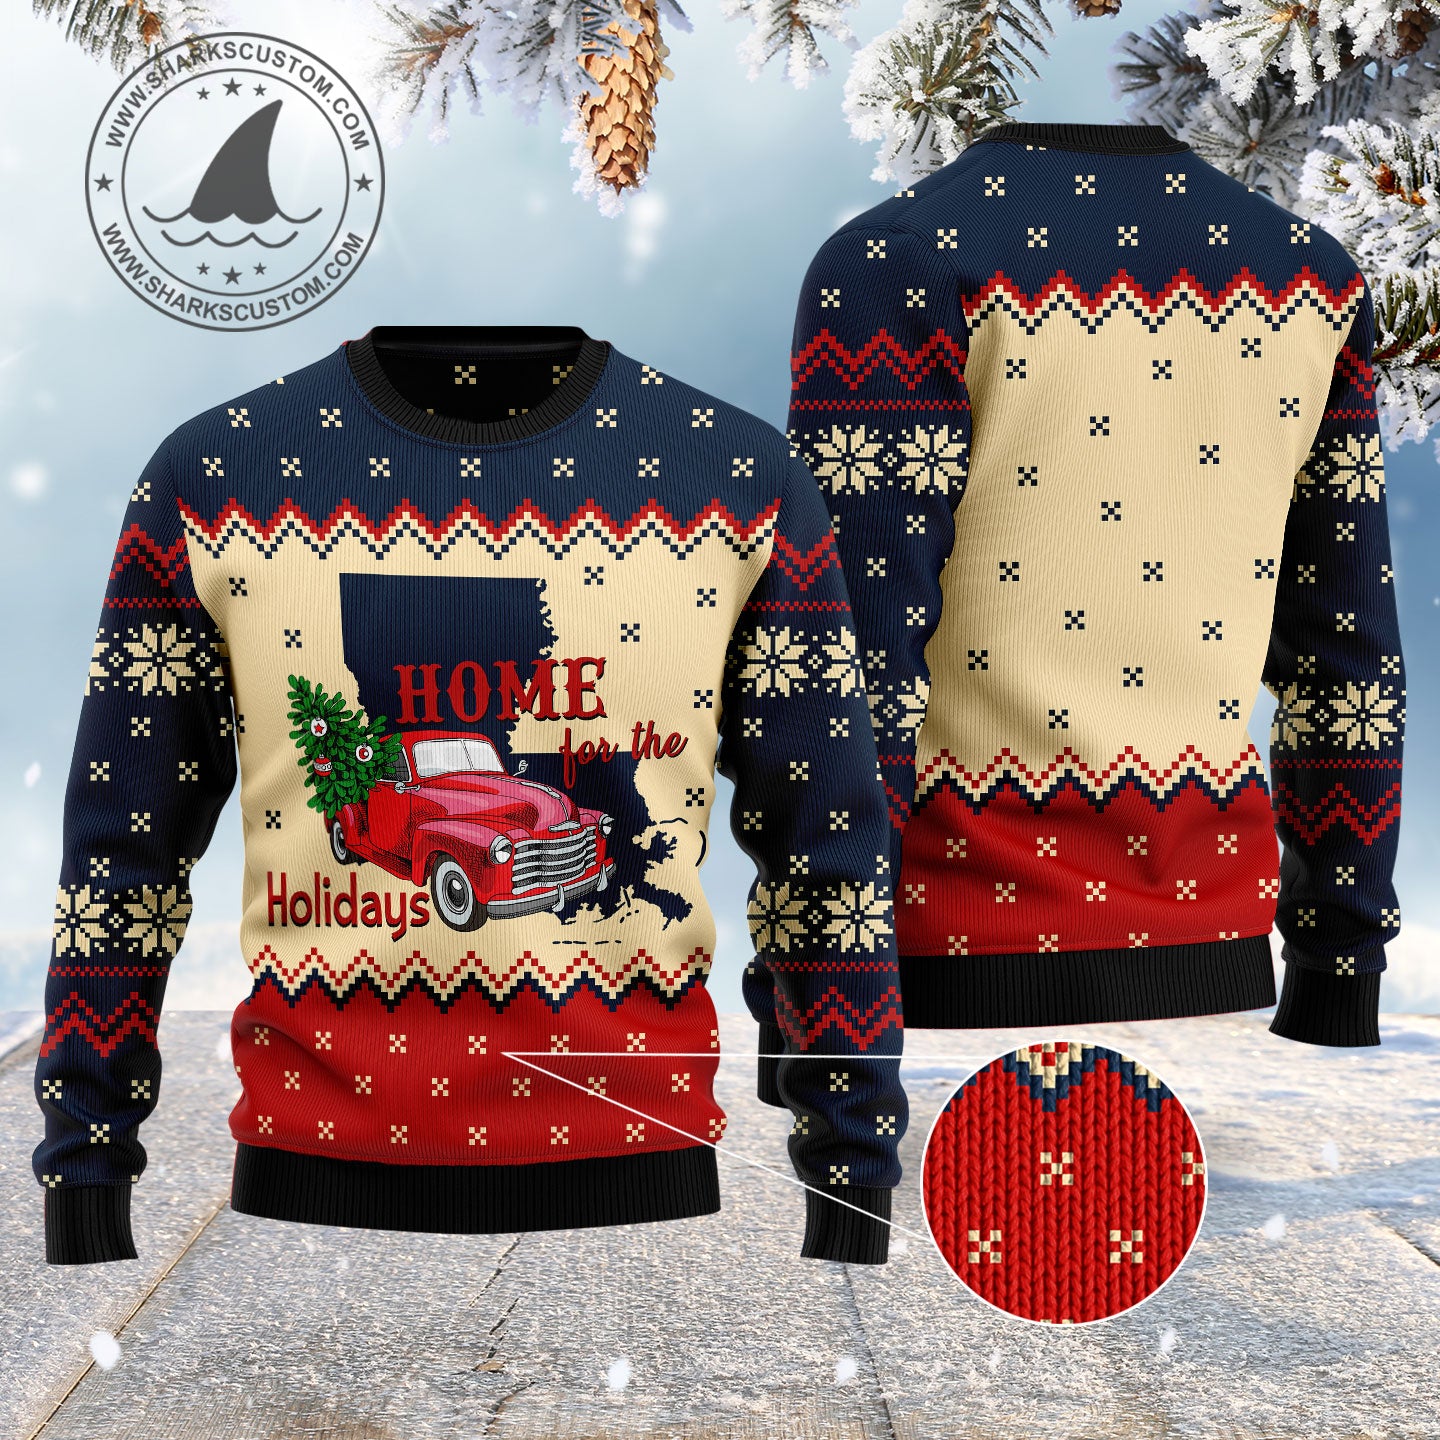 Home For The Holidays Louisiana HZ100803 Ugly Christmas Sweater